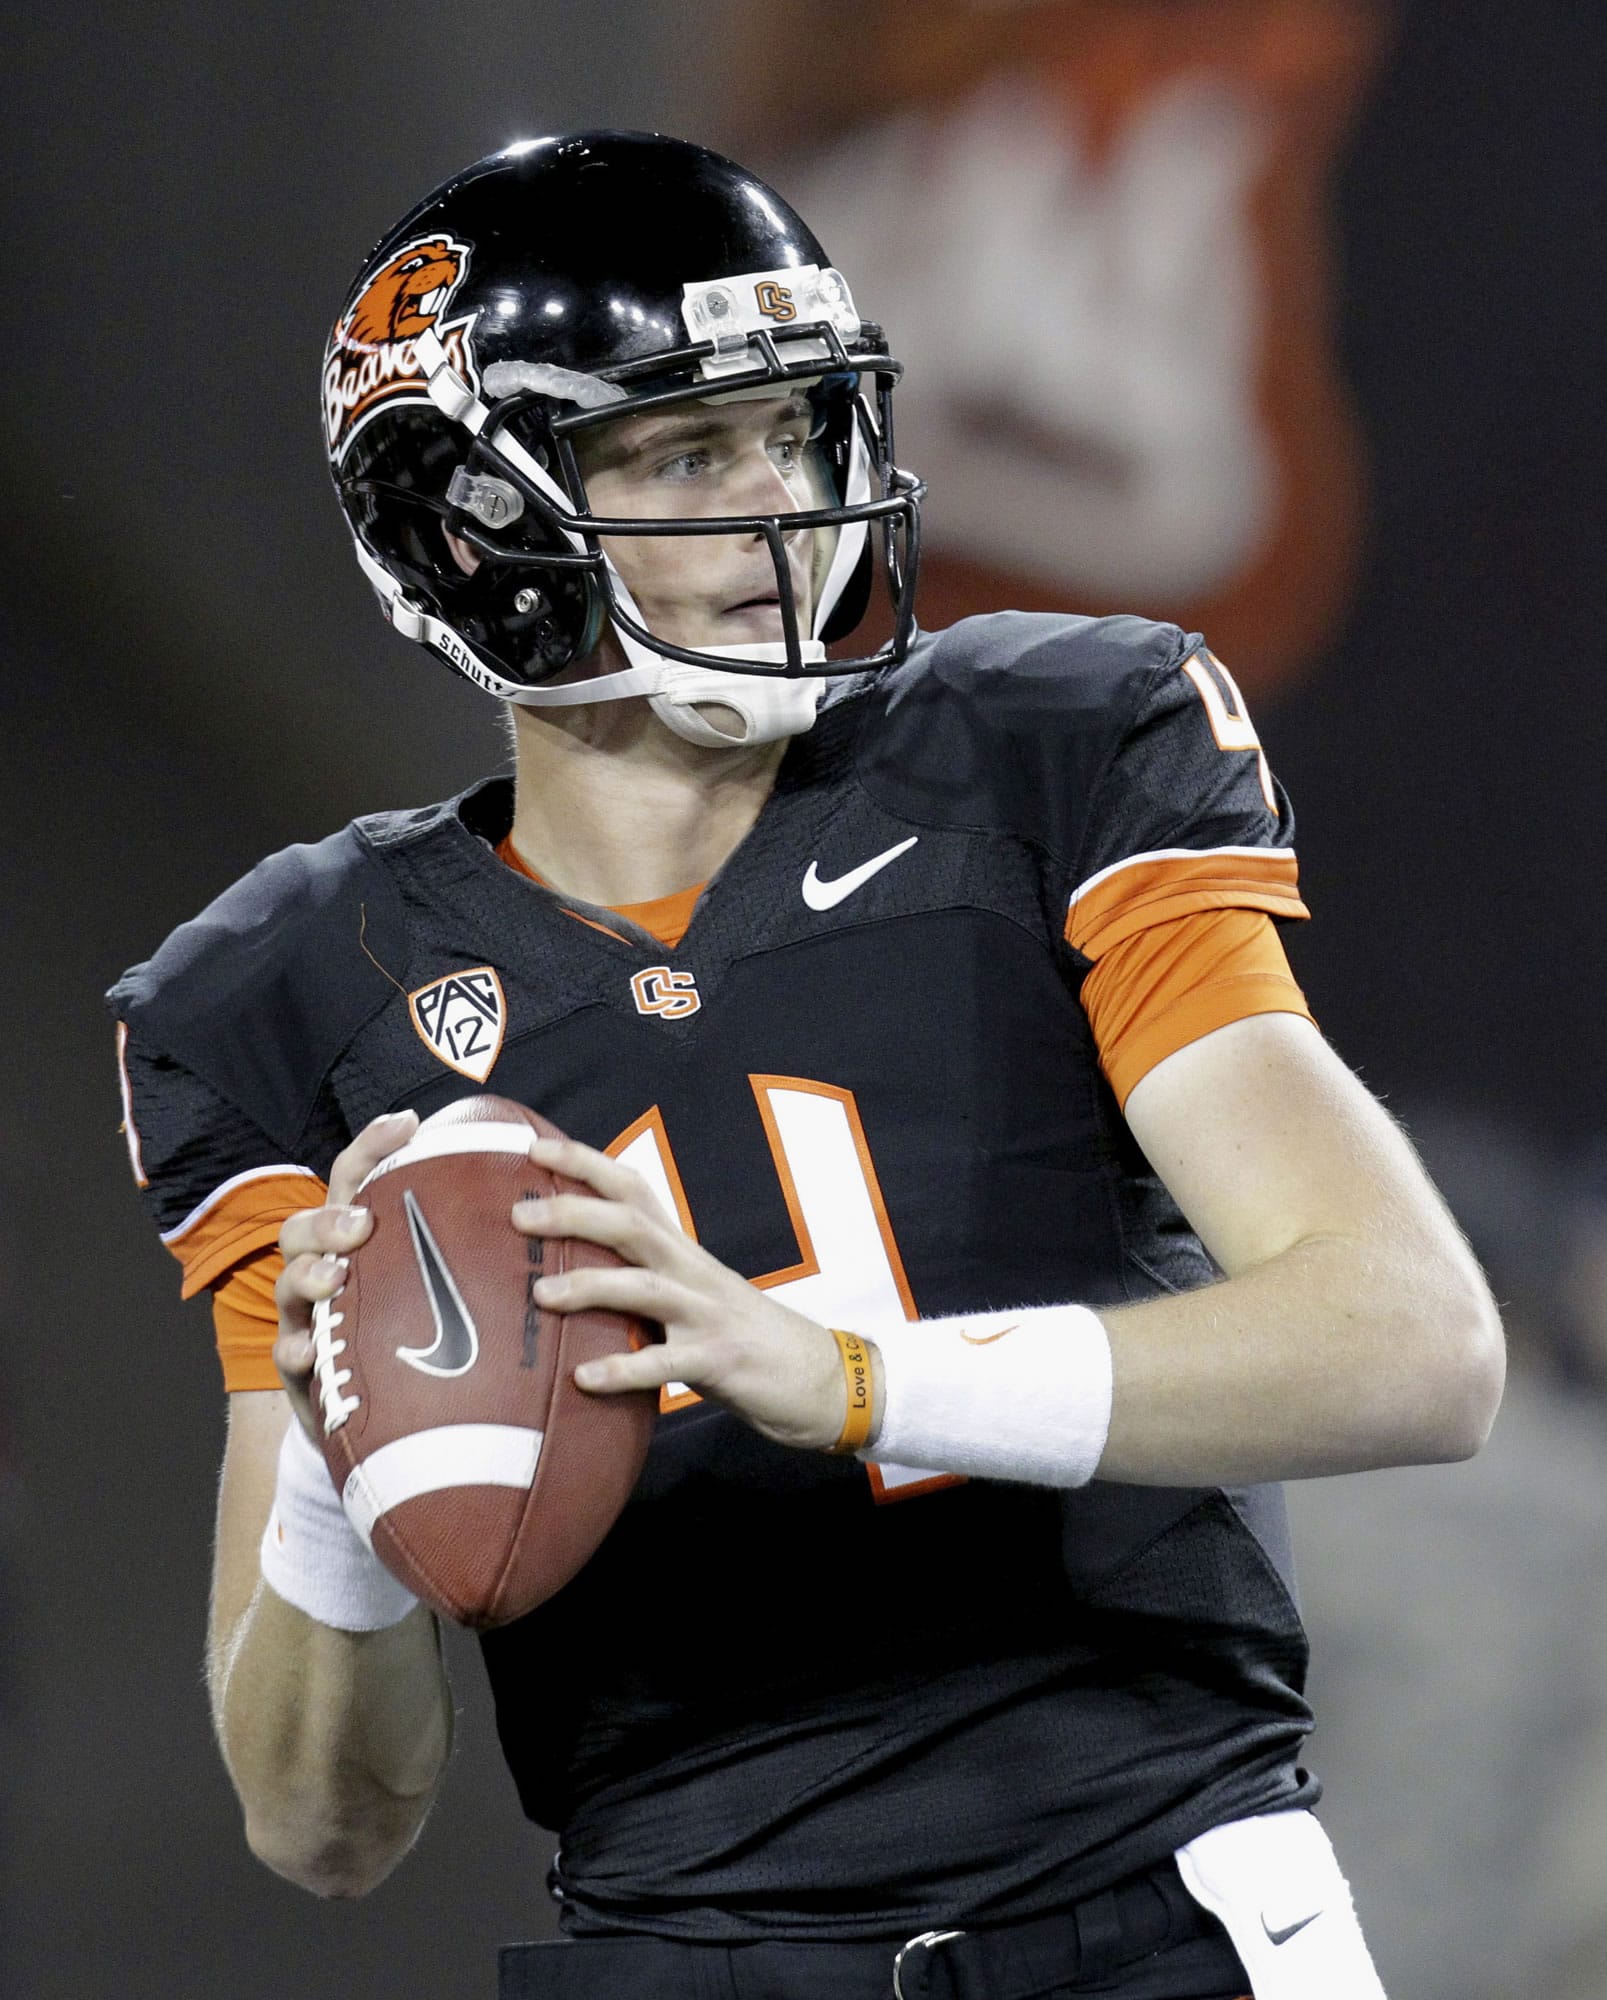 Sean Mannion is expected to make the start at quarterback for Oregon State vs. Eastern Washington.